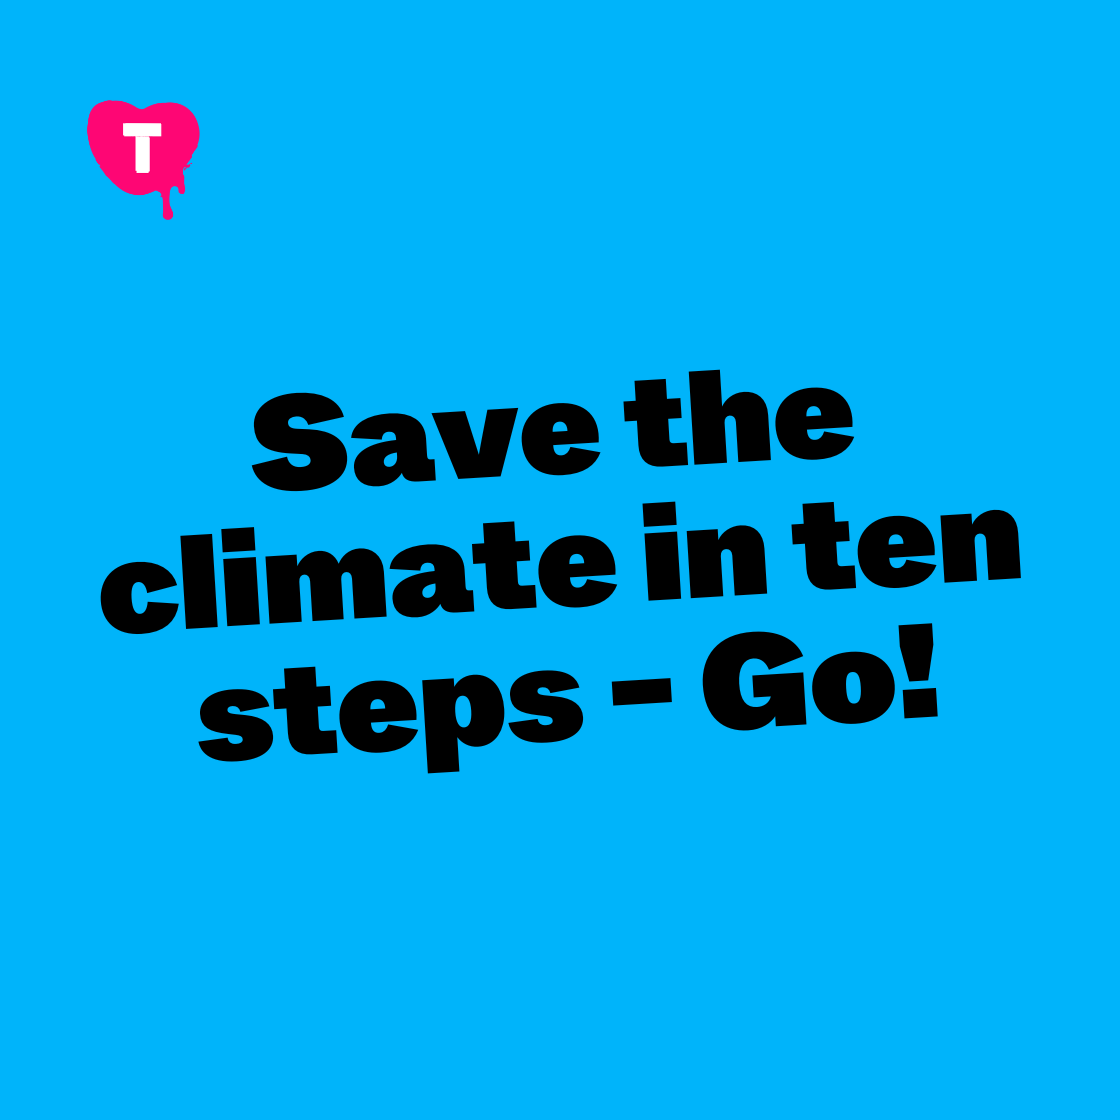 SAVE THE CLIMATE IN TEN STEPS - GO!